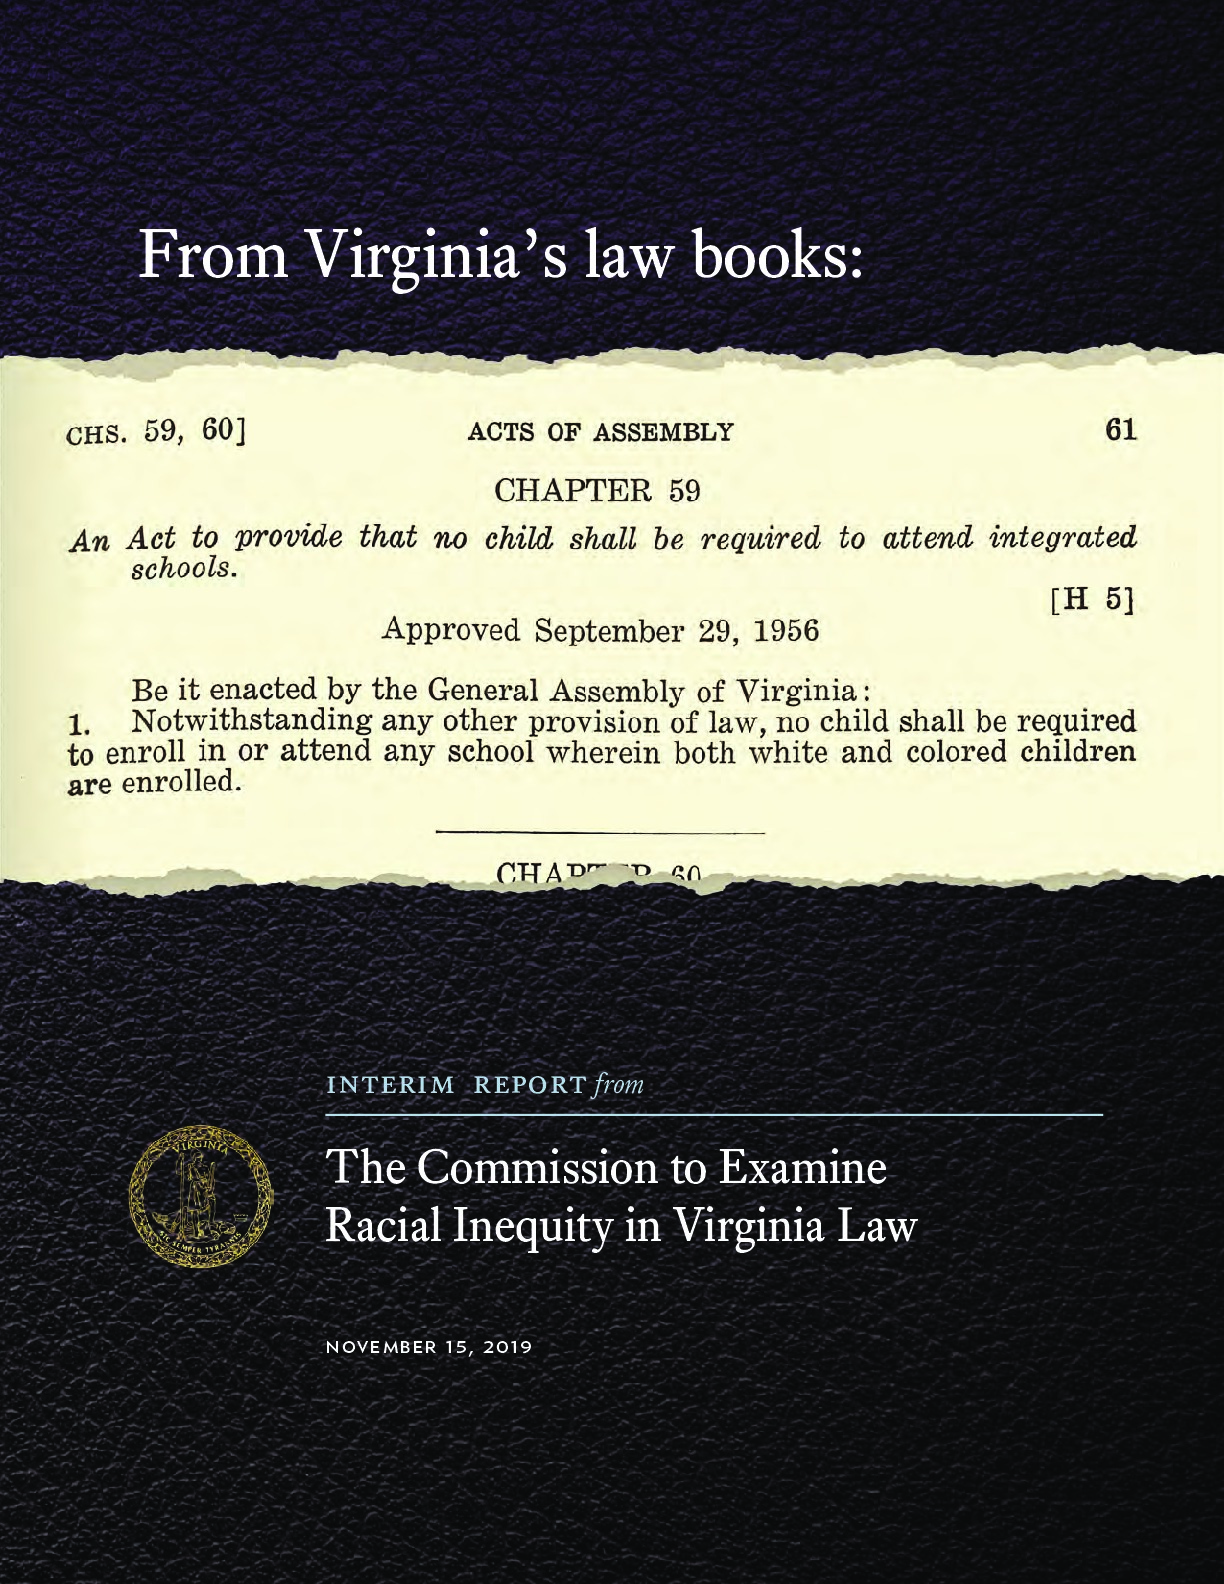 Interim-Report-From-the-Commission-to-Examine-Racial-Inequity-in-Virginia-Law.pdf